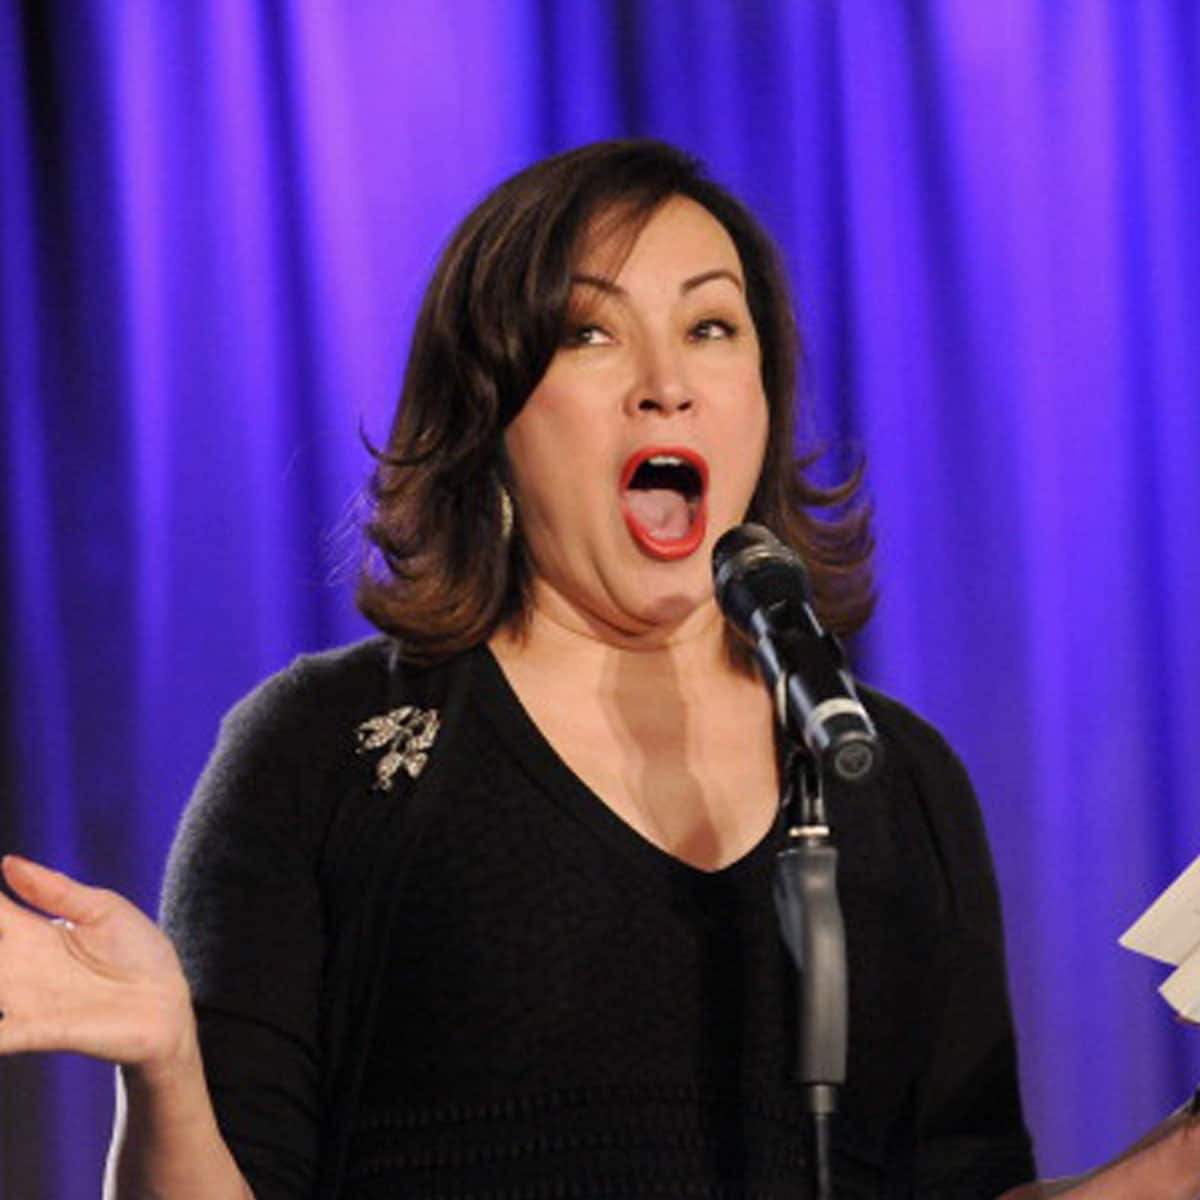 Actress Jennifer Tilly during Celebrity Autobiography: The Music Edition Volume 4 at The GRAMMY Museum